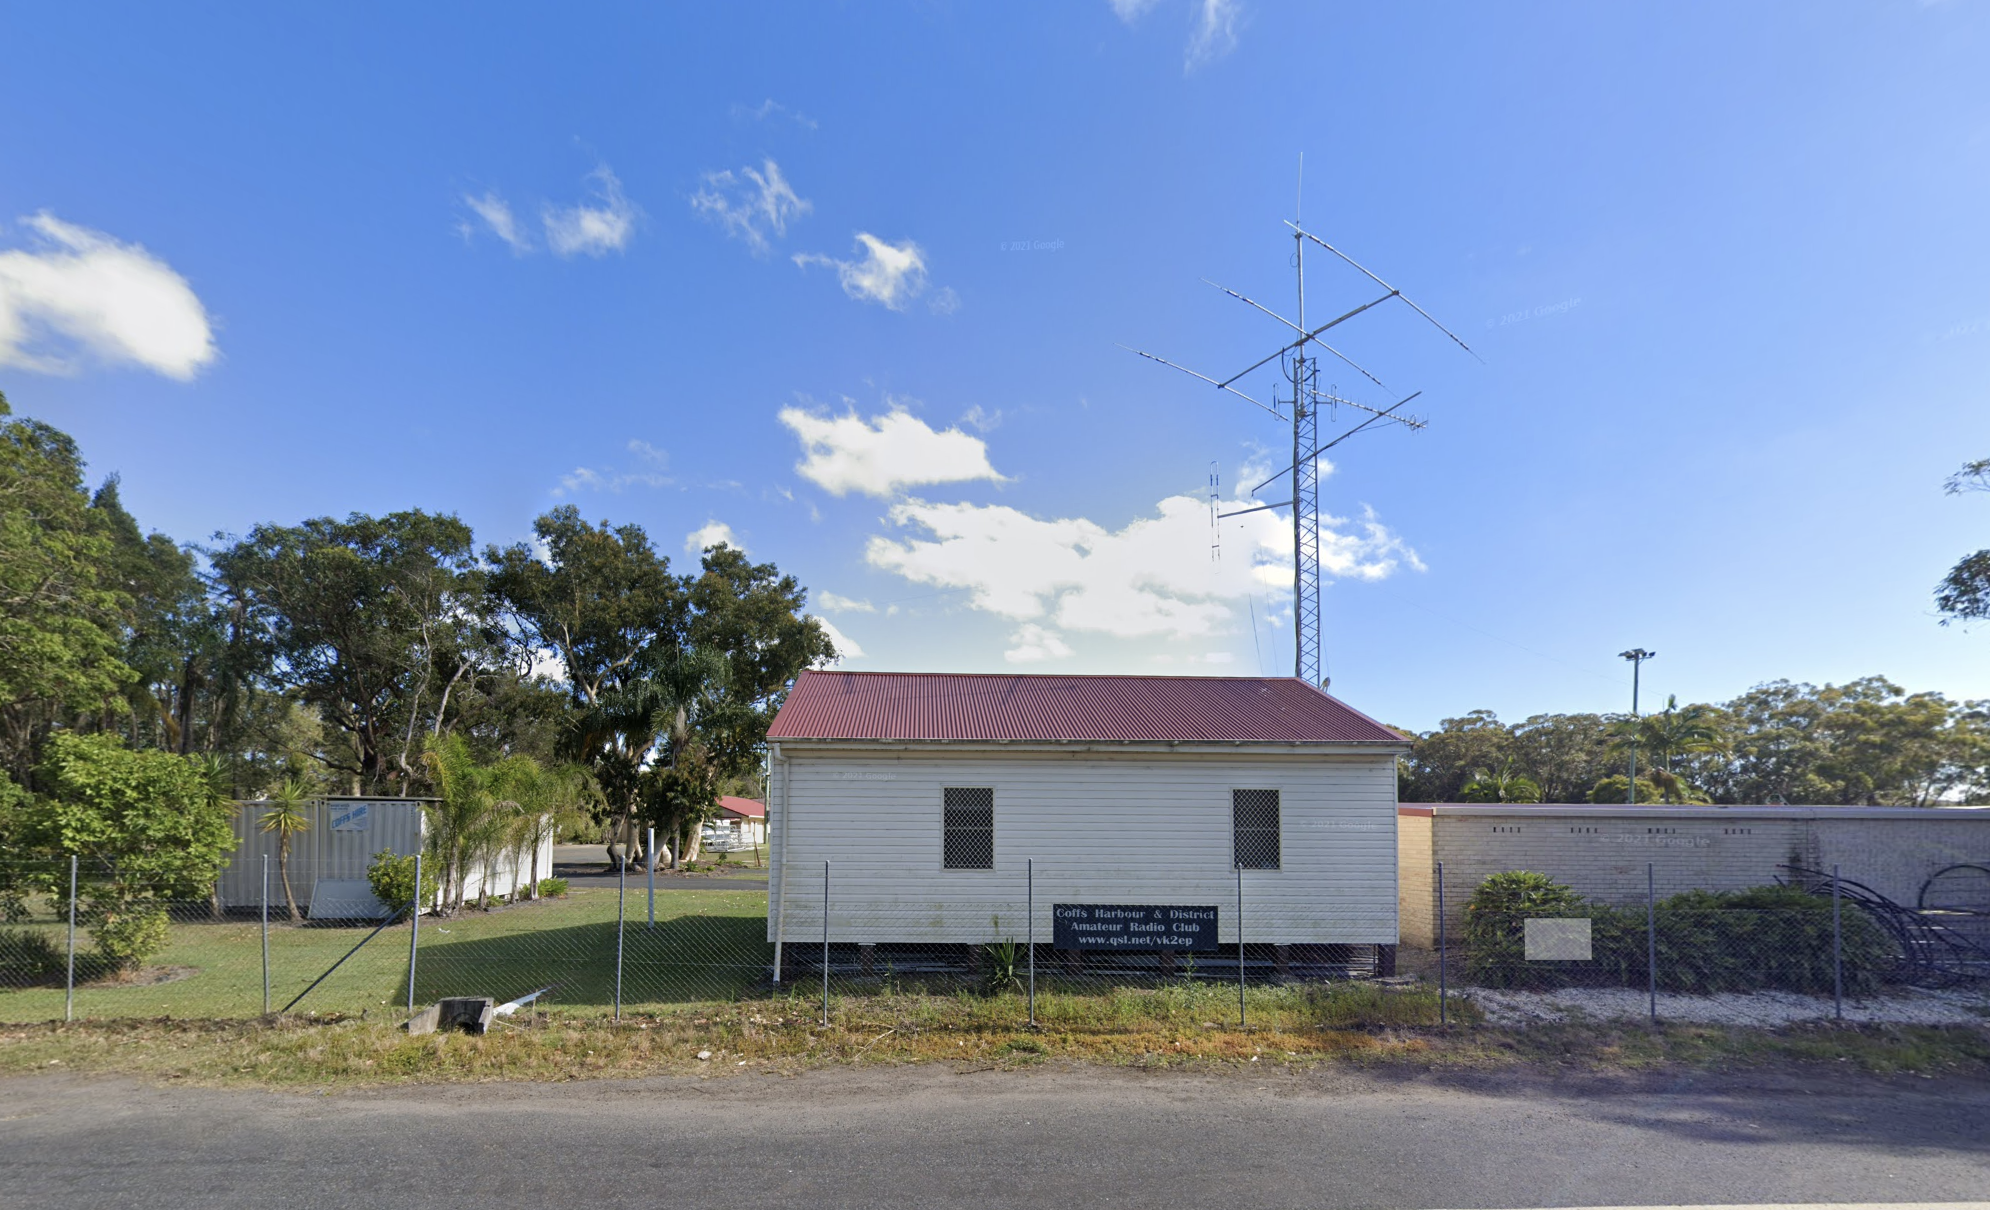 Coffs Clubhouse Repeater site